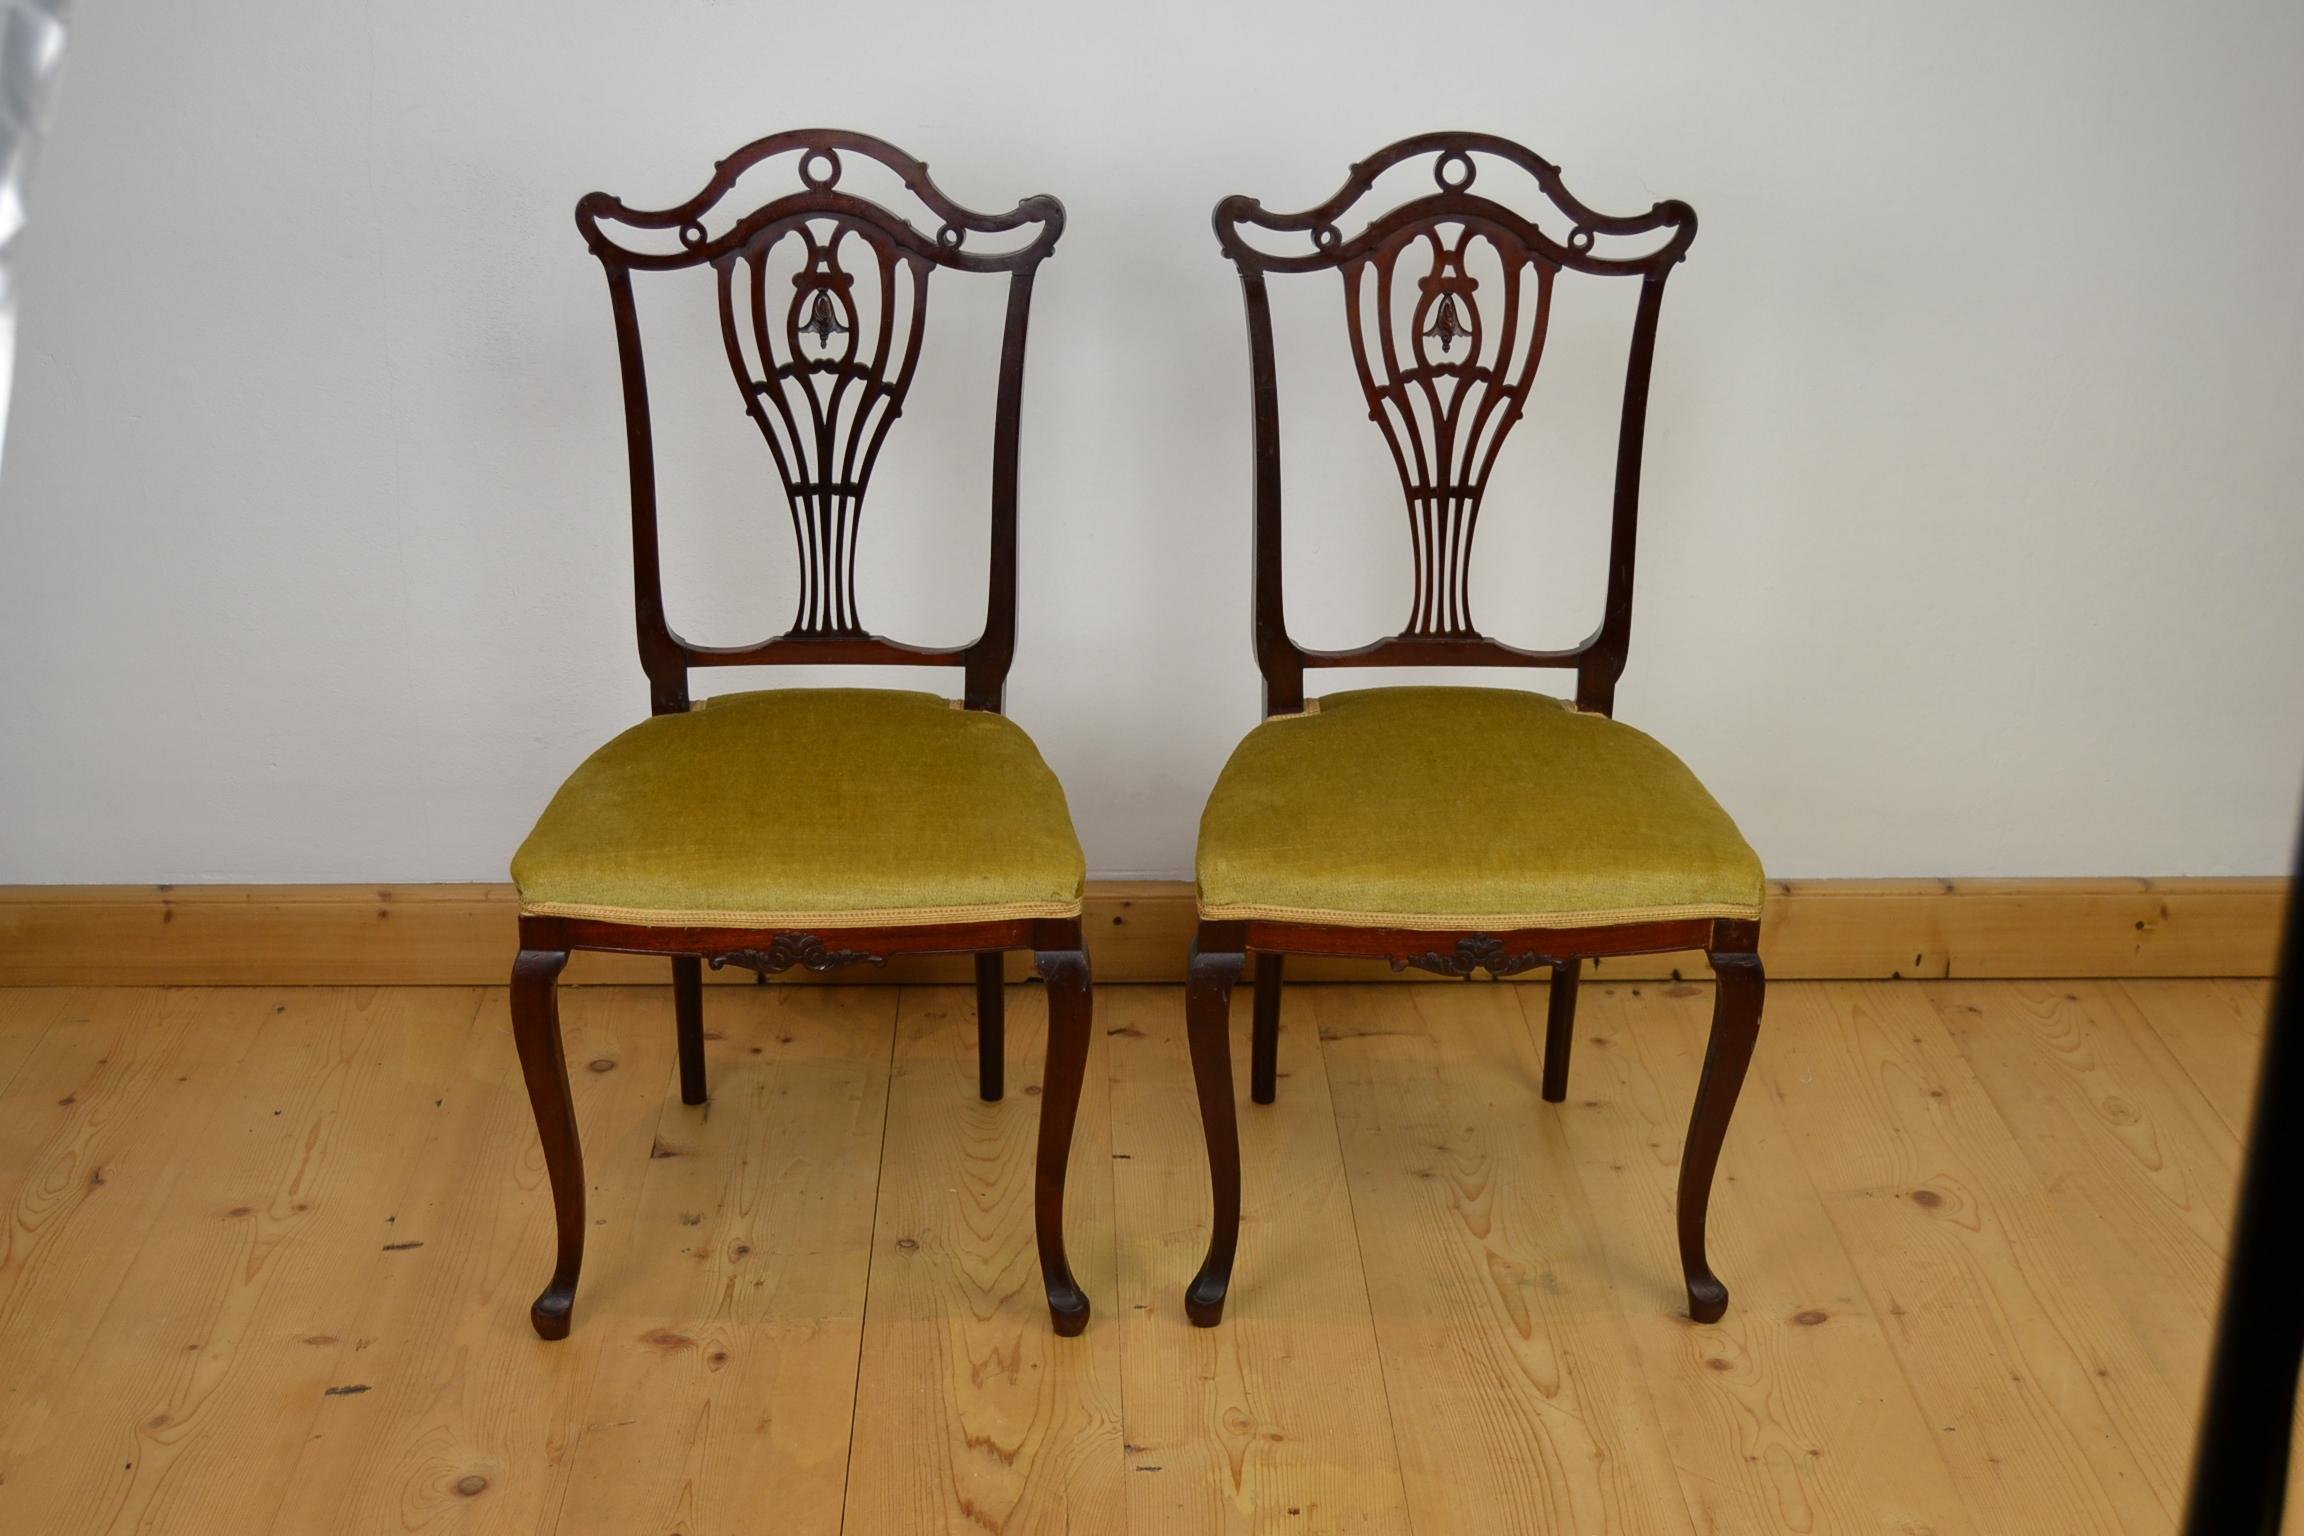 Hepplewhite Hollandia Pander & Zn Pair of Side Chairs, Late 19th Century For Sale